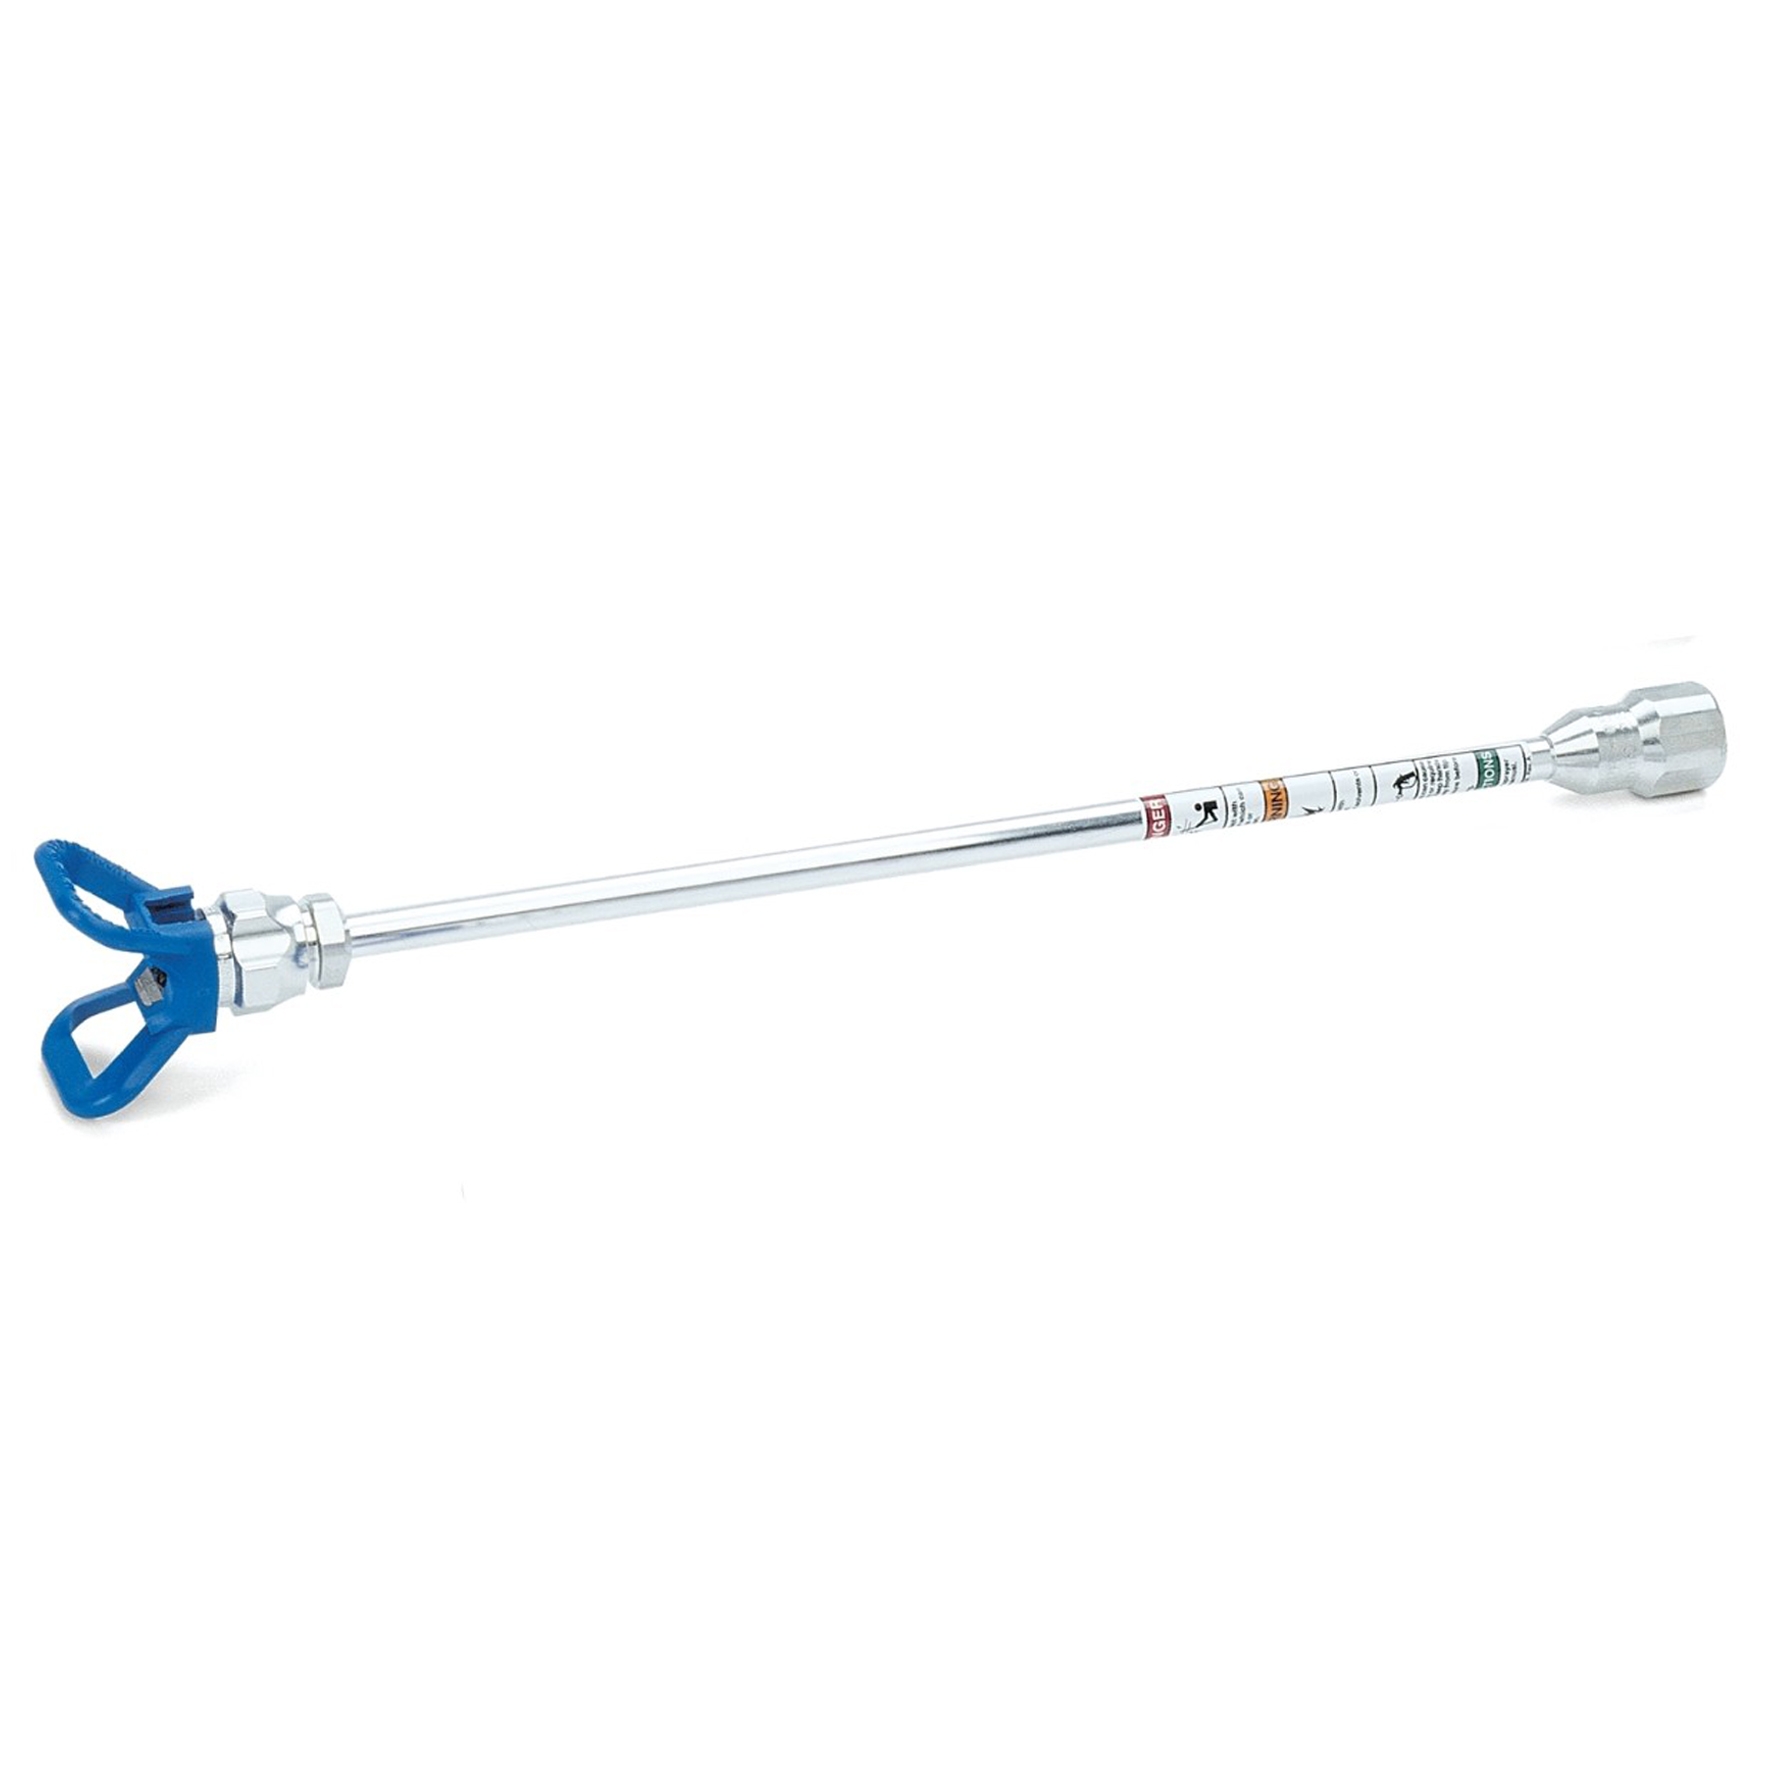 287020 GRACO 40 CM TIP EXTENSION WITH RAC X GUARD